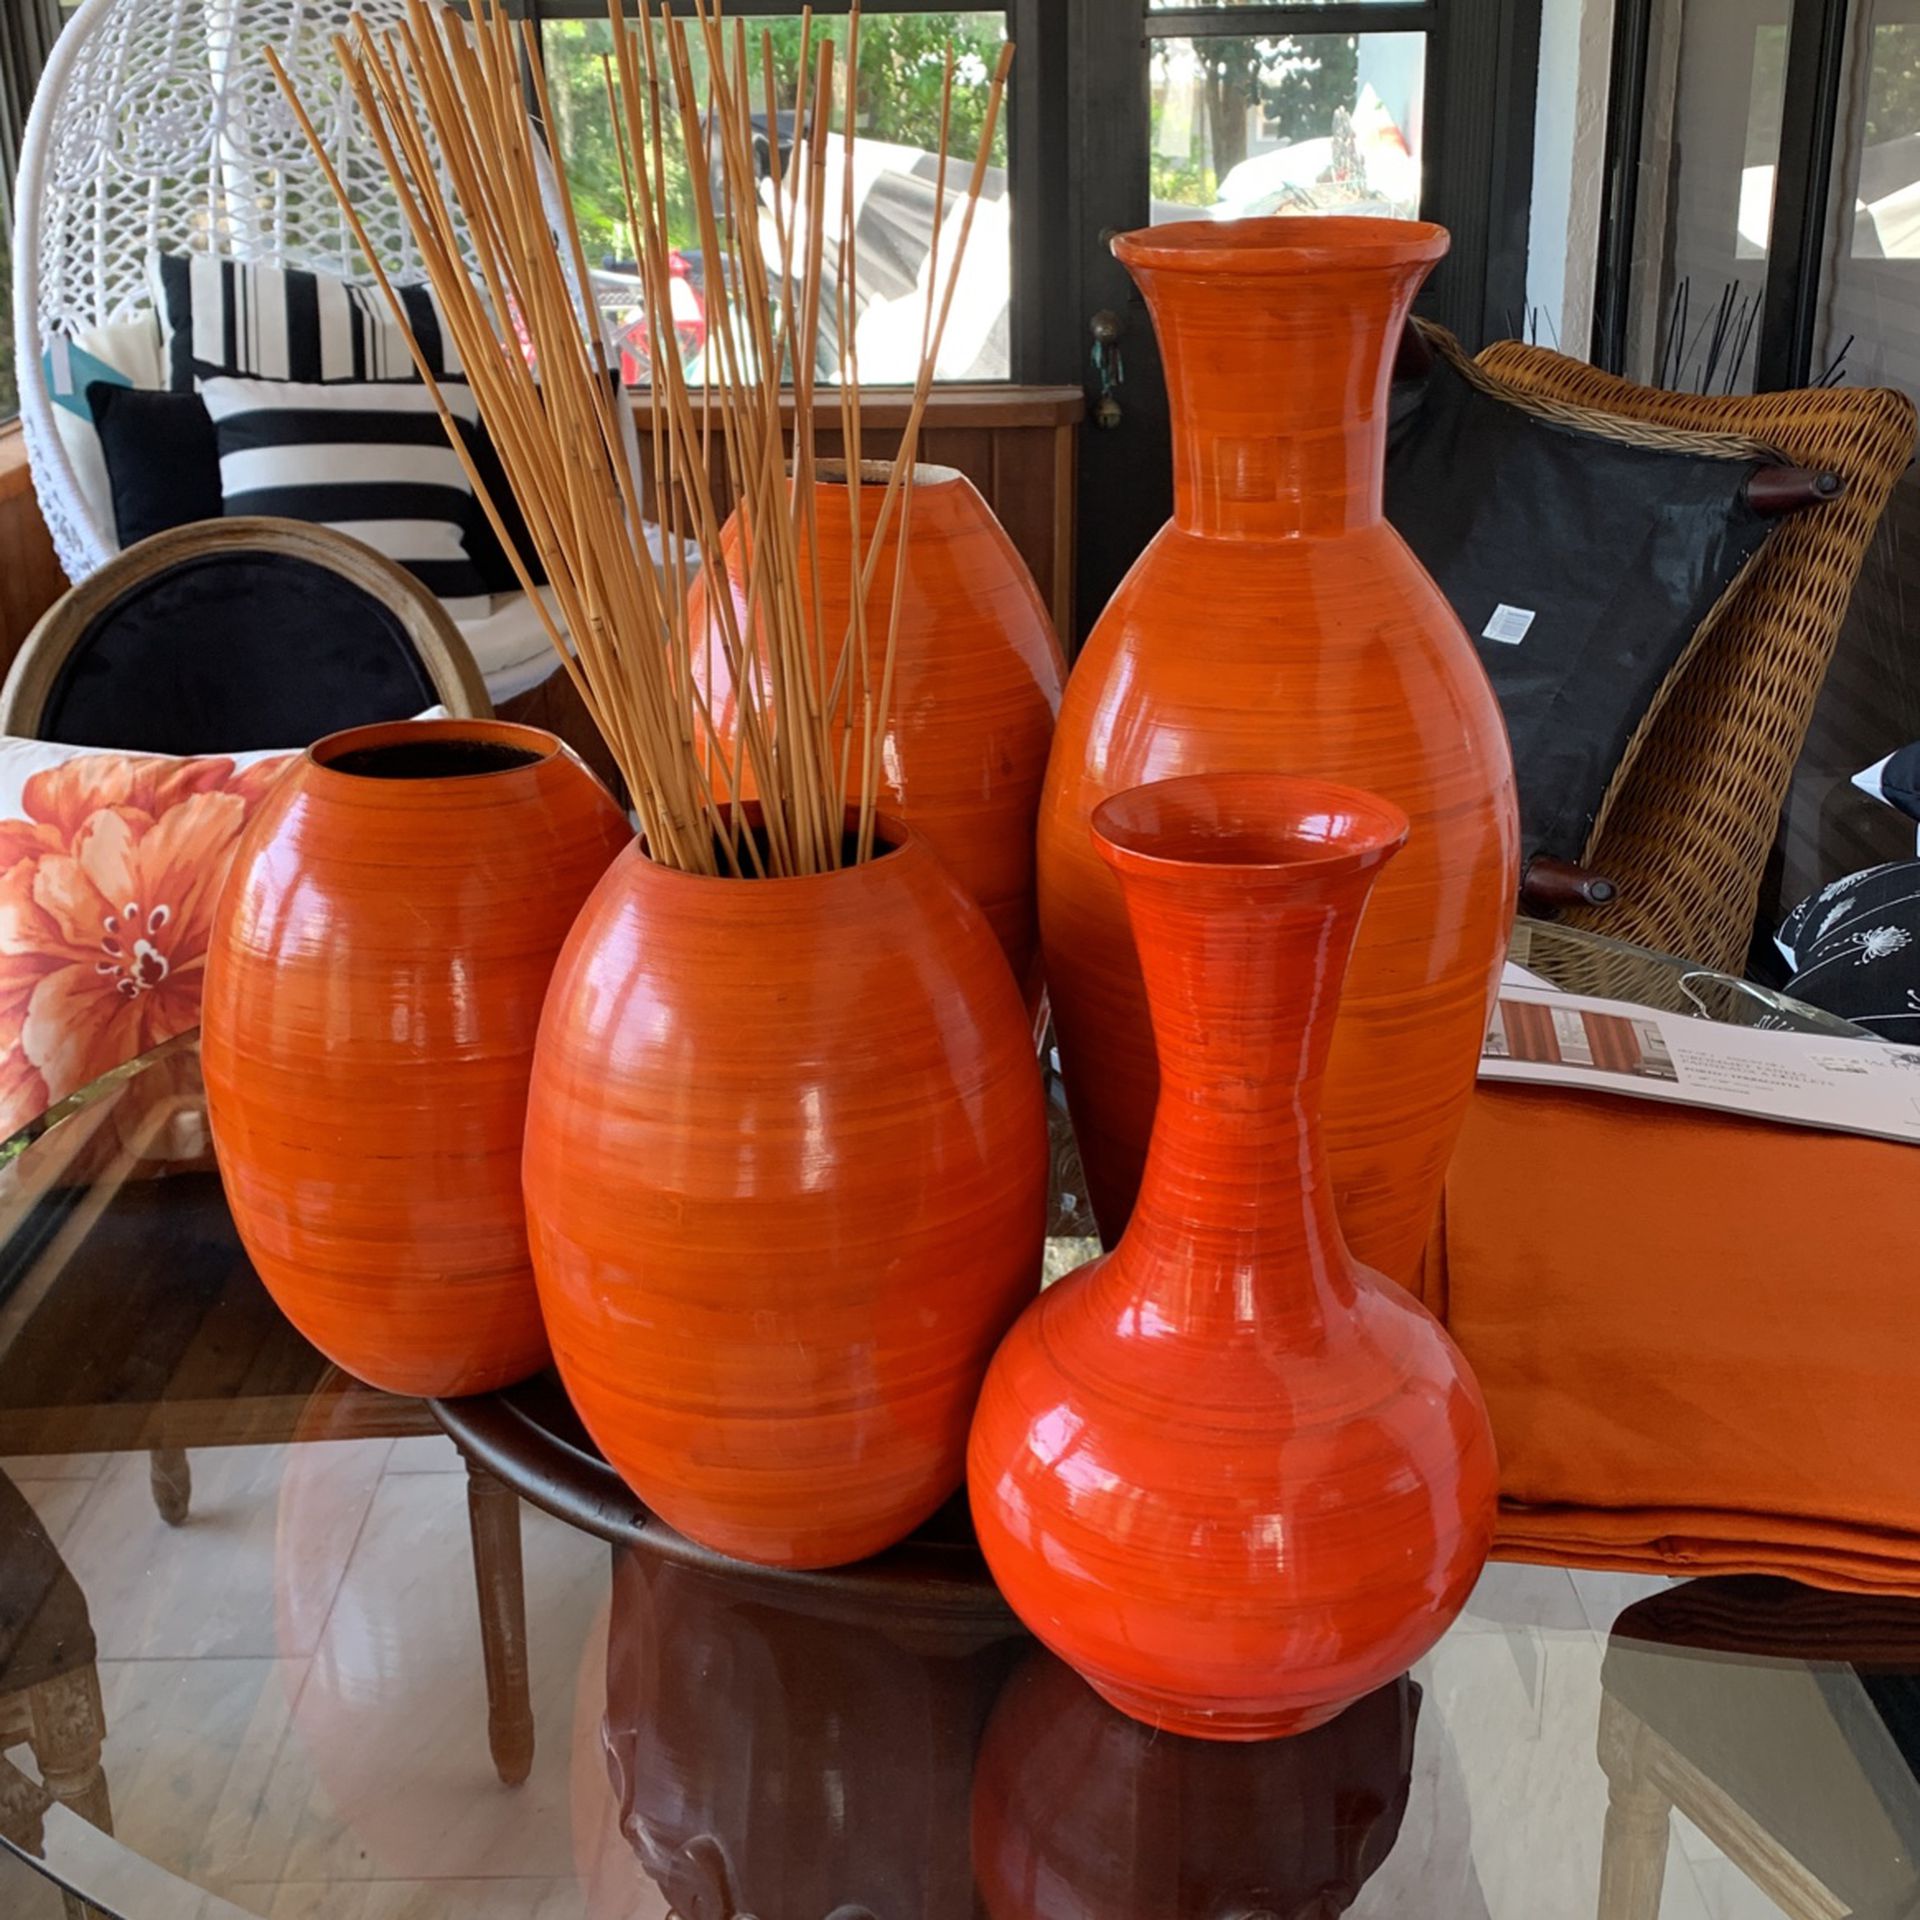 Beautiful Vases 5, 3 Orange Flower Pillows, 2 Sets Of Panel Curtains, 2 Small Orange Pillows, chairs And Table NOT Included Or For Sale!